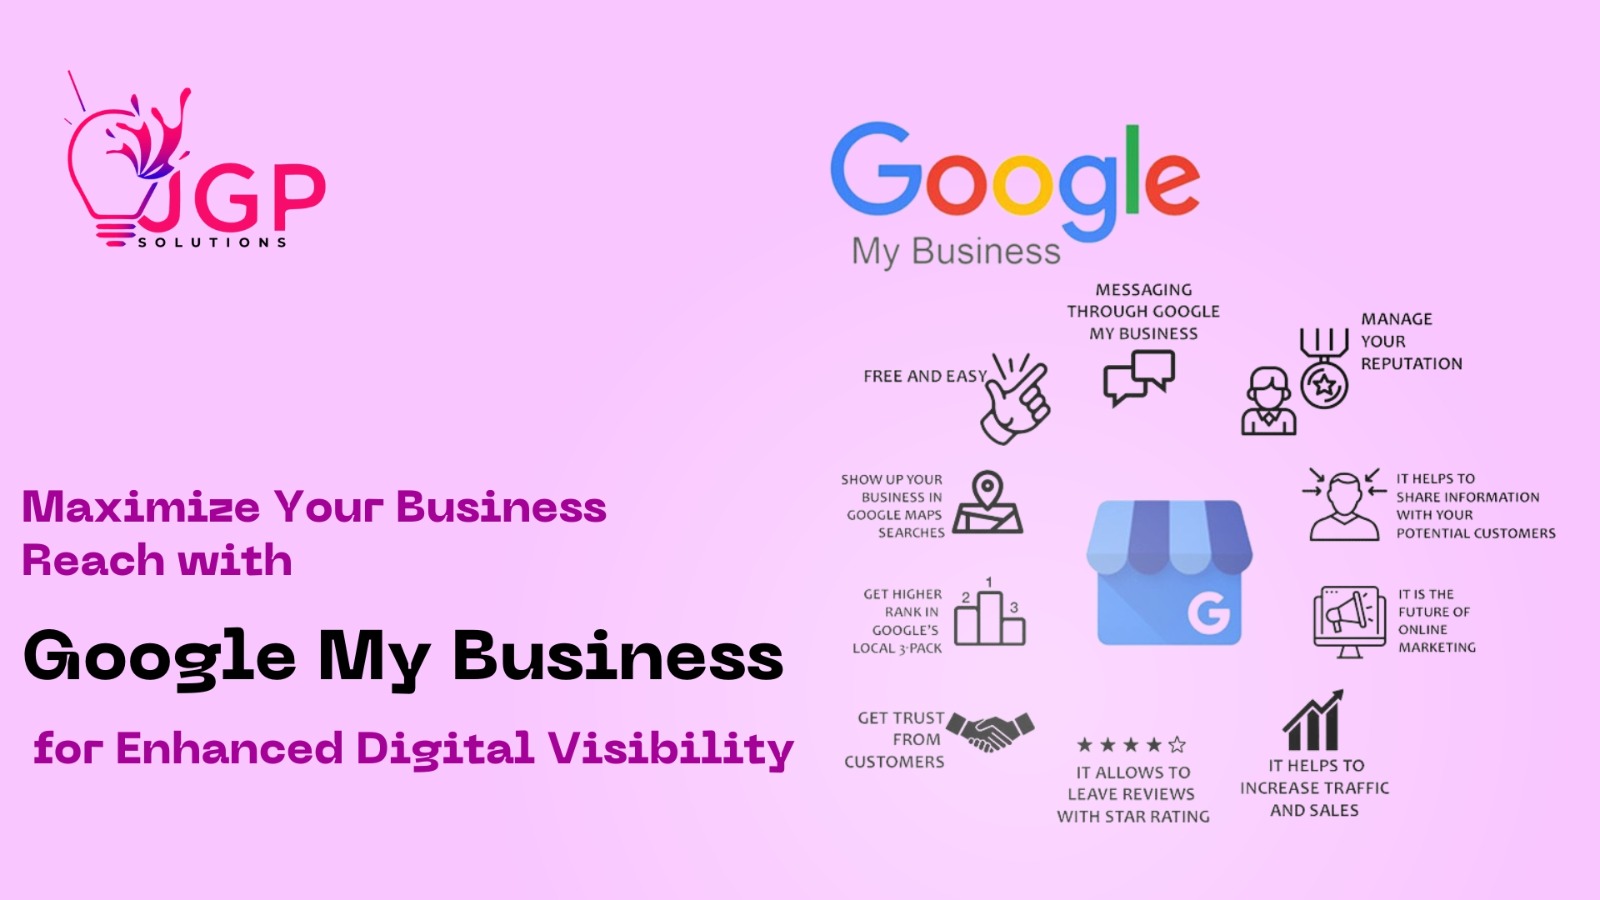 Maximize Your Business Reach with Google My Business for Enhanced Digital Visibility